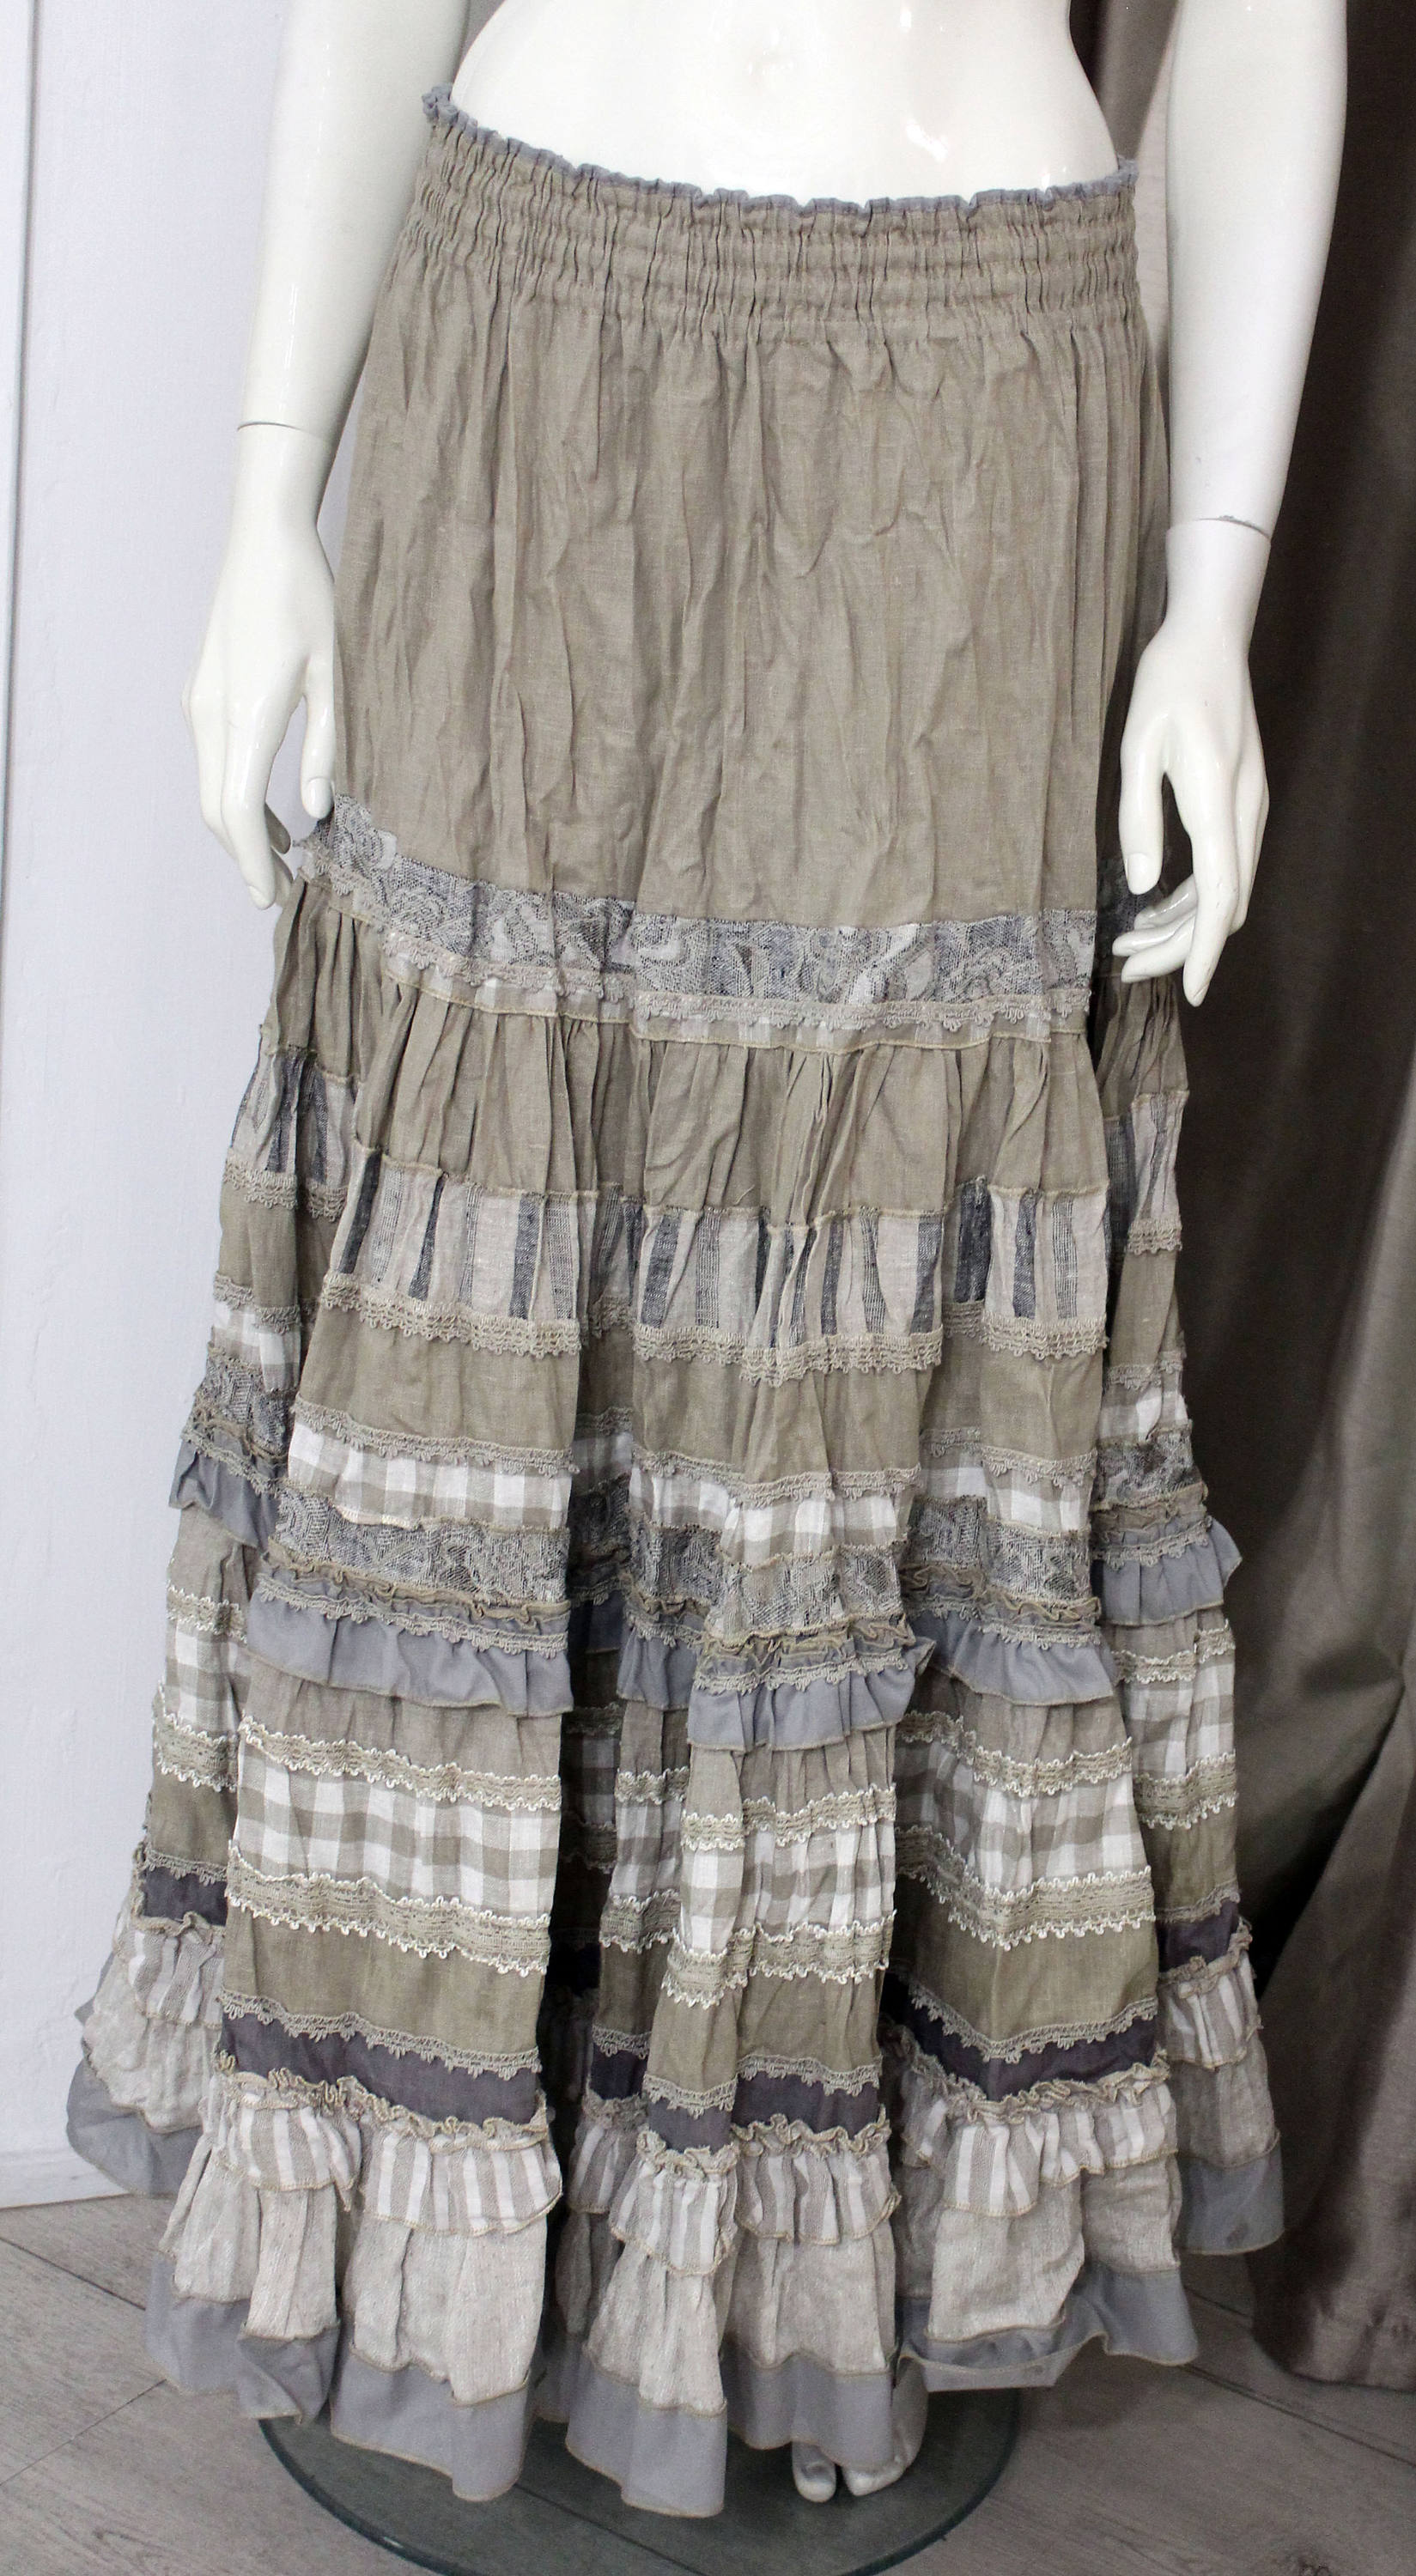 Long Tiered Linen Skirt in Boho Chic Style - Etsy